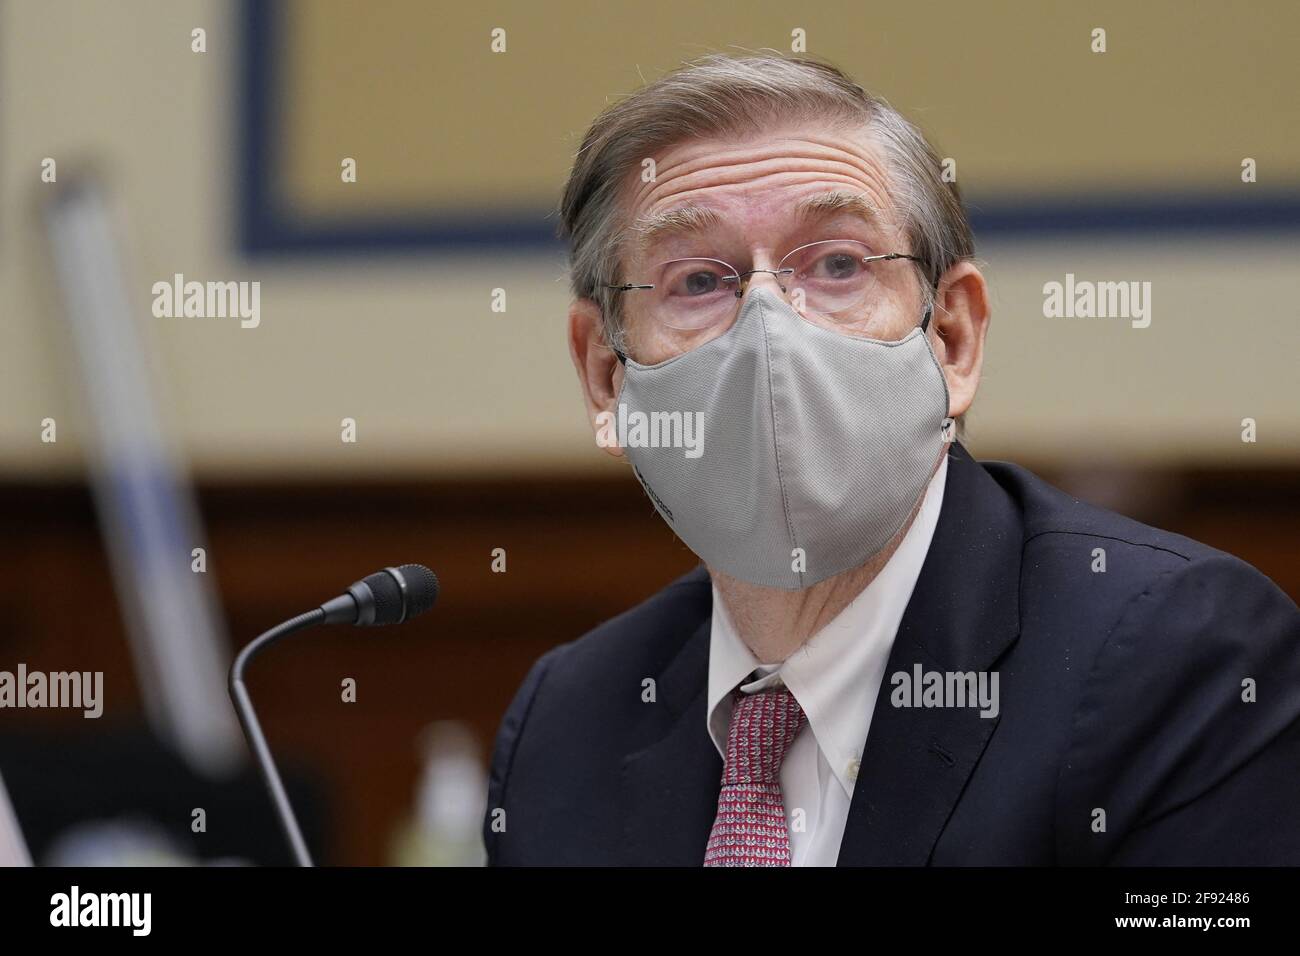 Department of Health and Human Services Chief Science Officer for COVID Response David Kessler speaks during a House Select Subcommittee on the Coronavirus Crisis hearing on Capitol Hill in Washington, Thursday, April 15, 2021. (AP Photo/Susan Walsh, Pool) Stock Photo